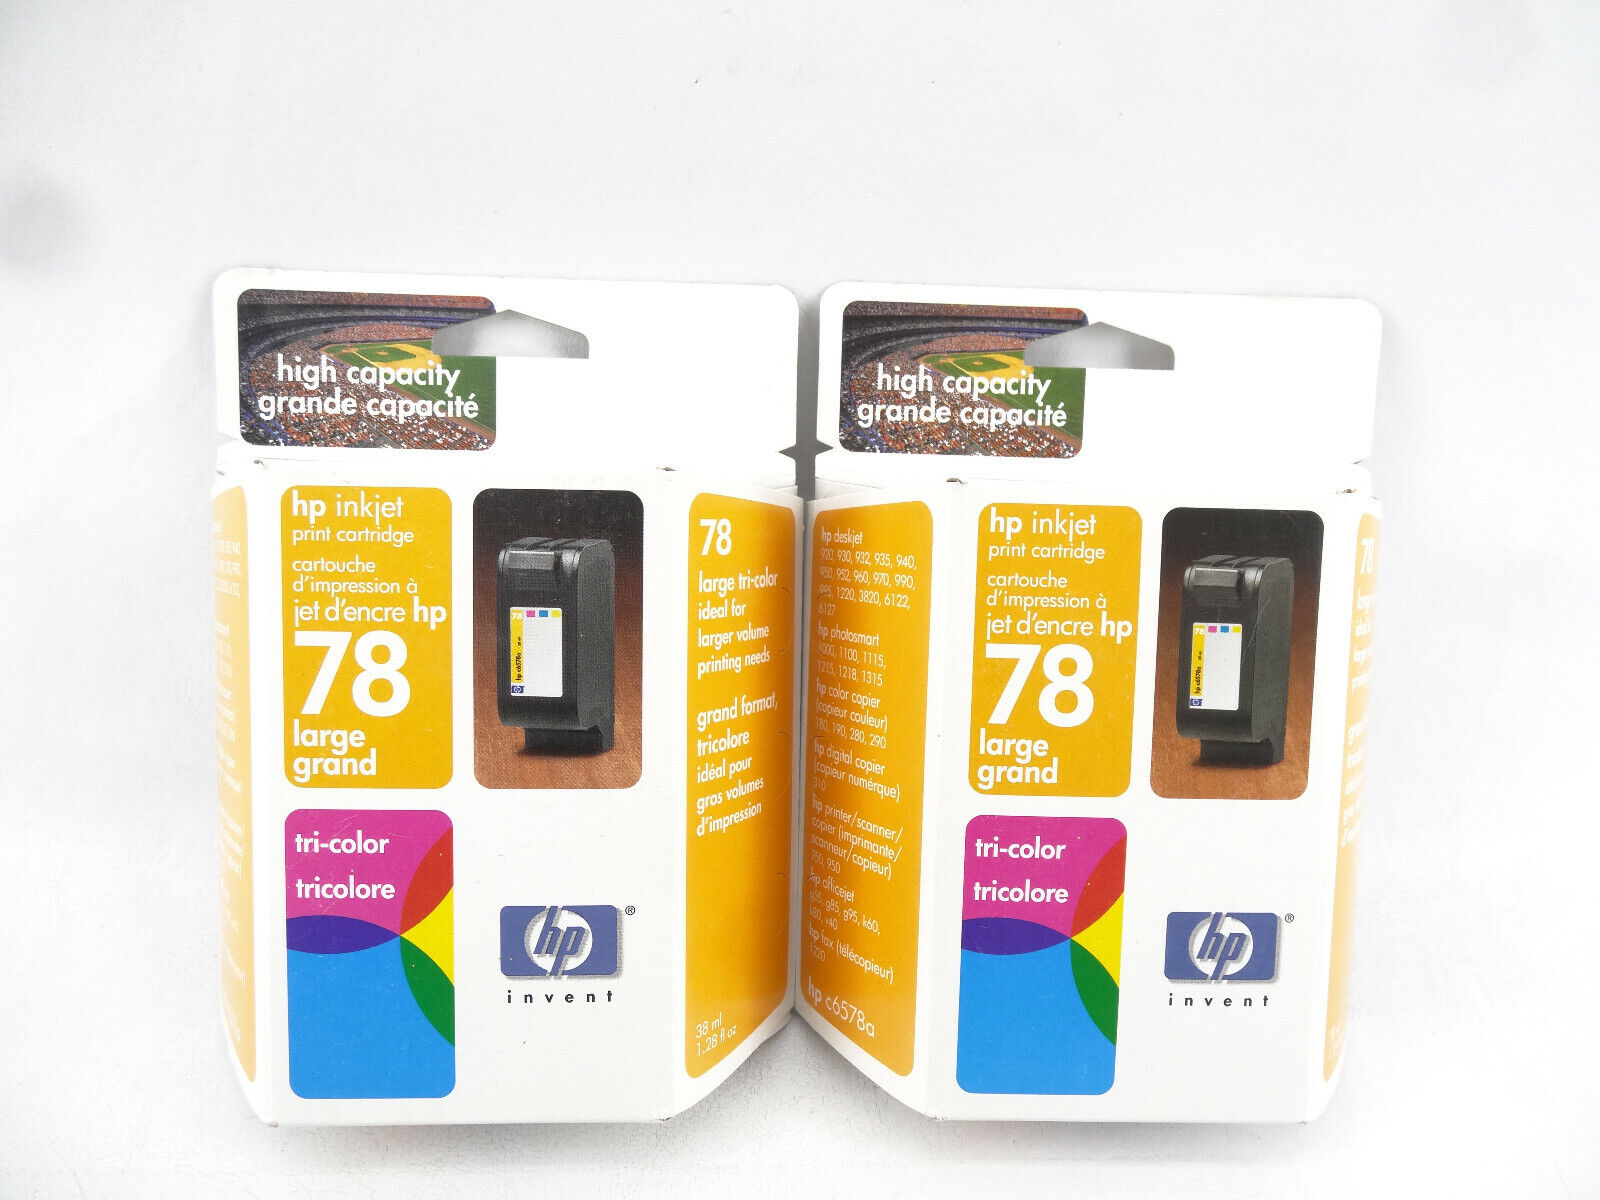 Genuine HP 78 High Capacity Tri-Color Ink Lot Of 2 New Old Stock EXP 08/04